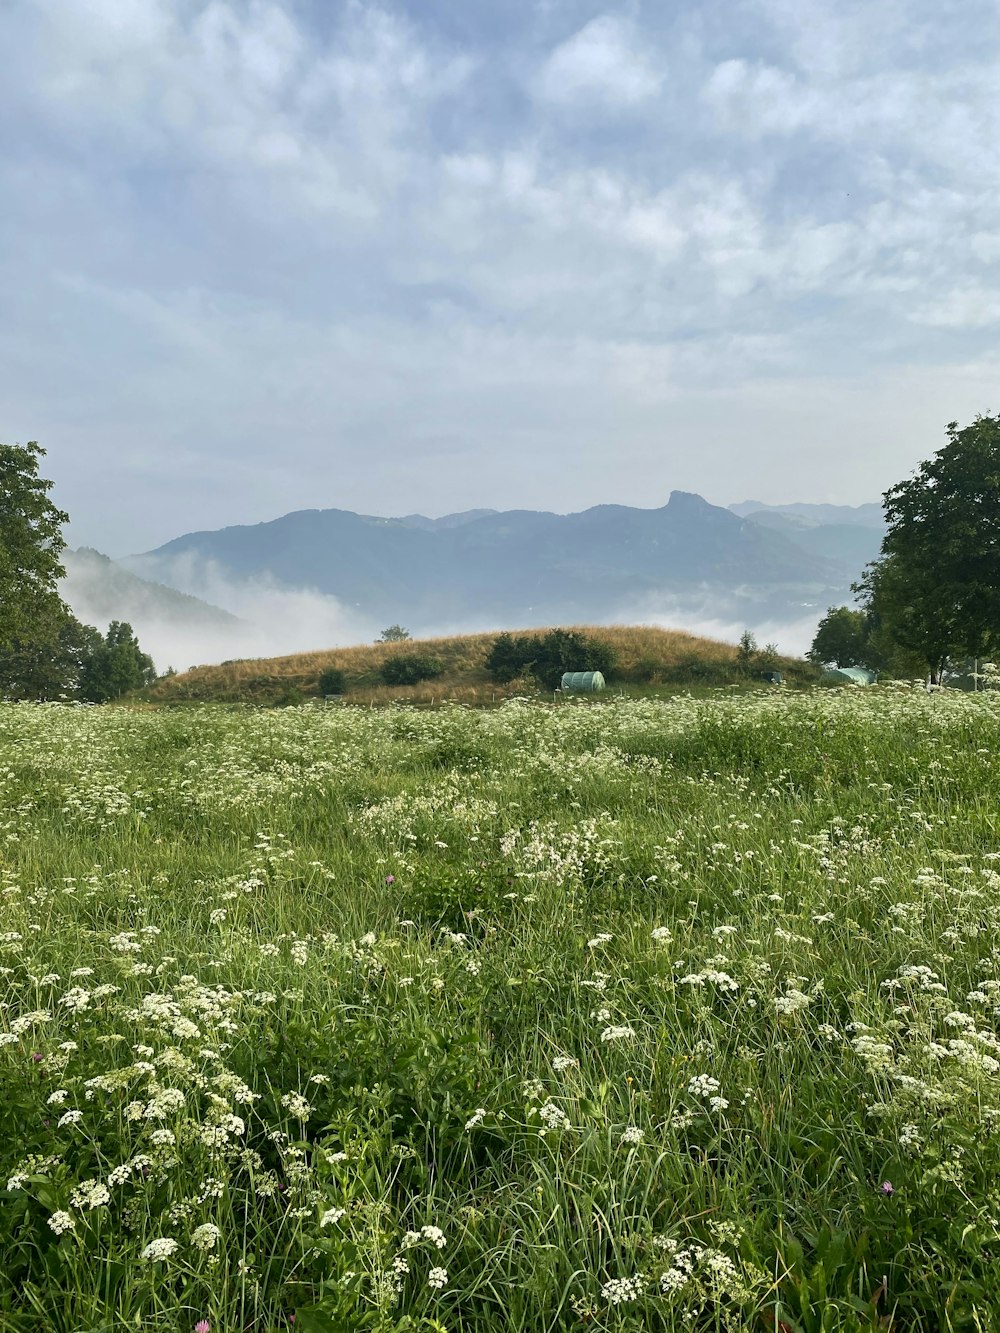 a grassy field with white flowers and mountains in the background